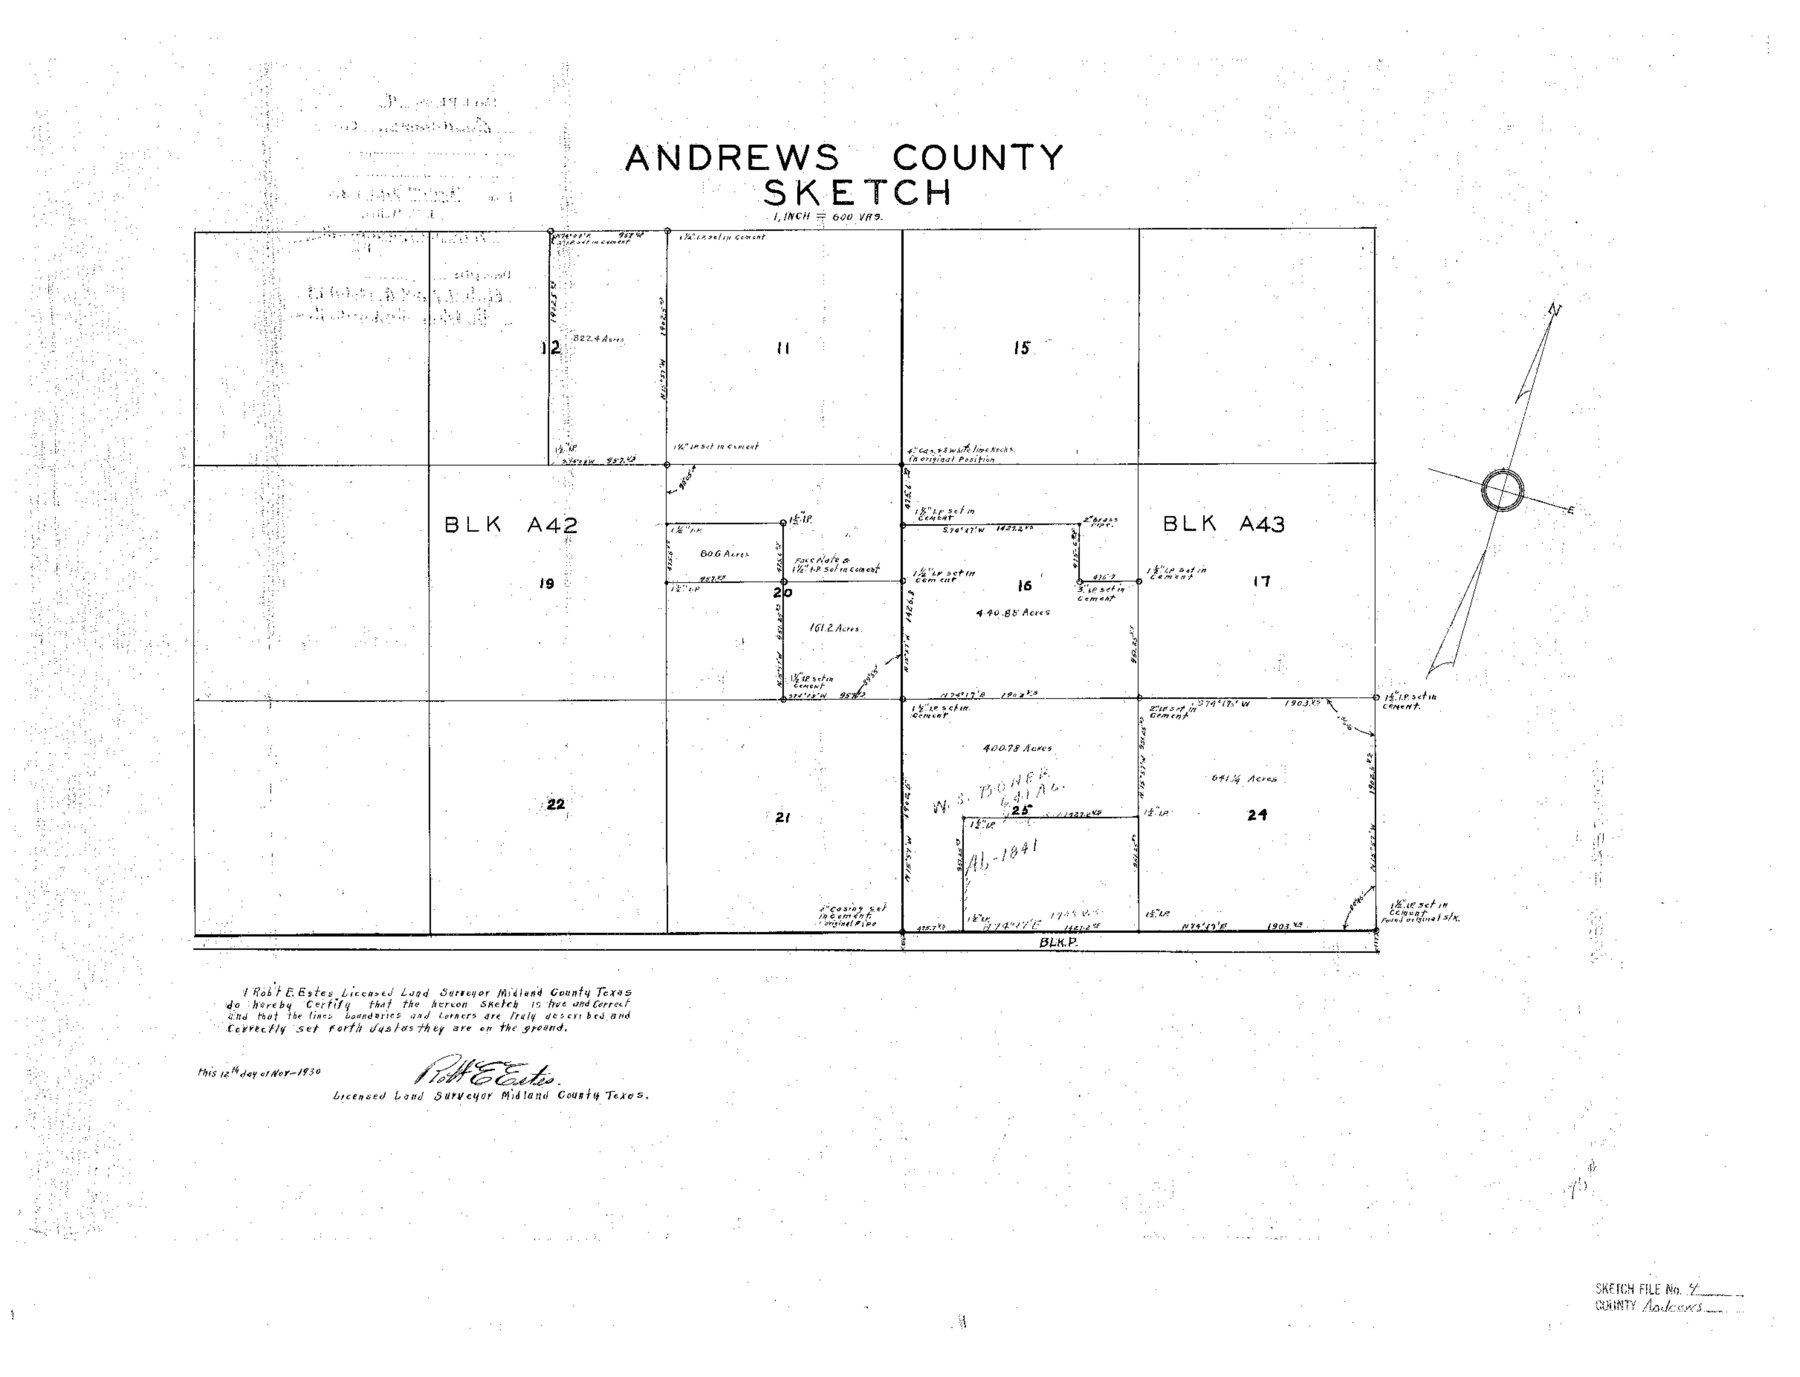 10809, Andrews County Sketch File 4, General Map Collection